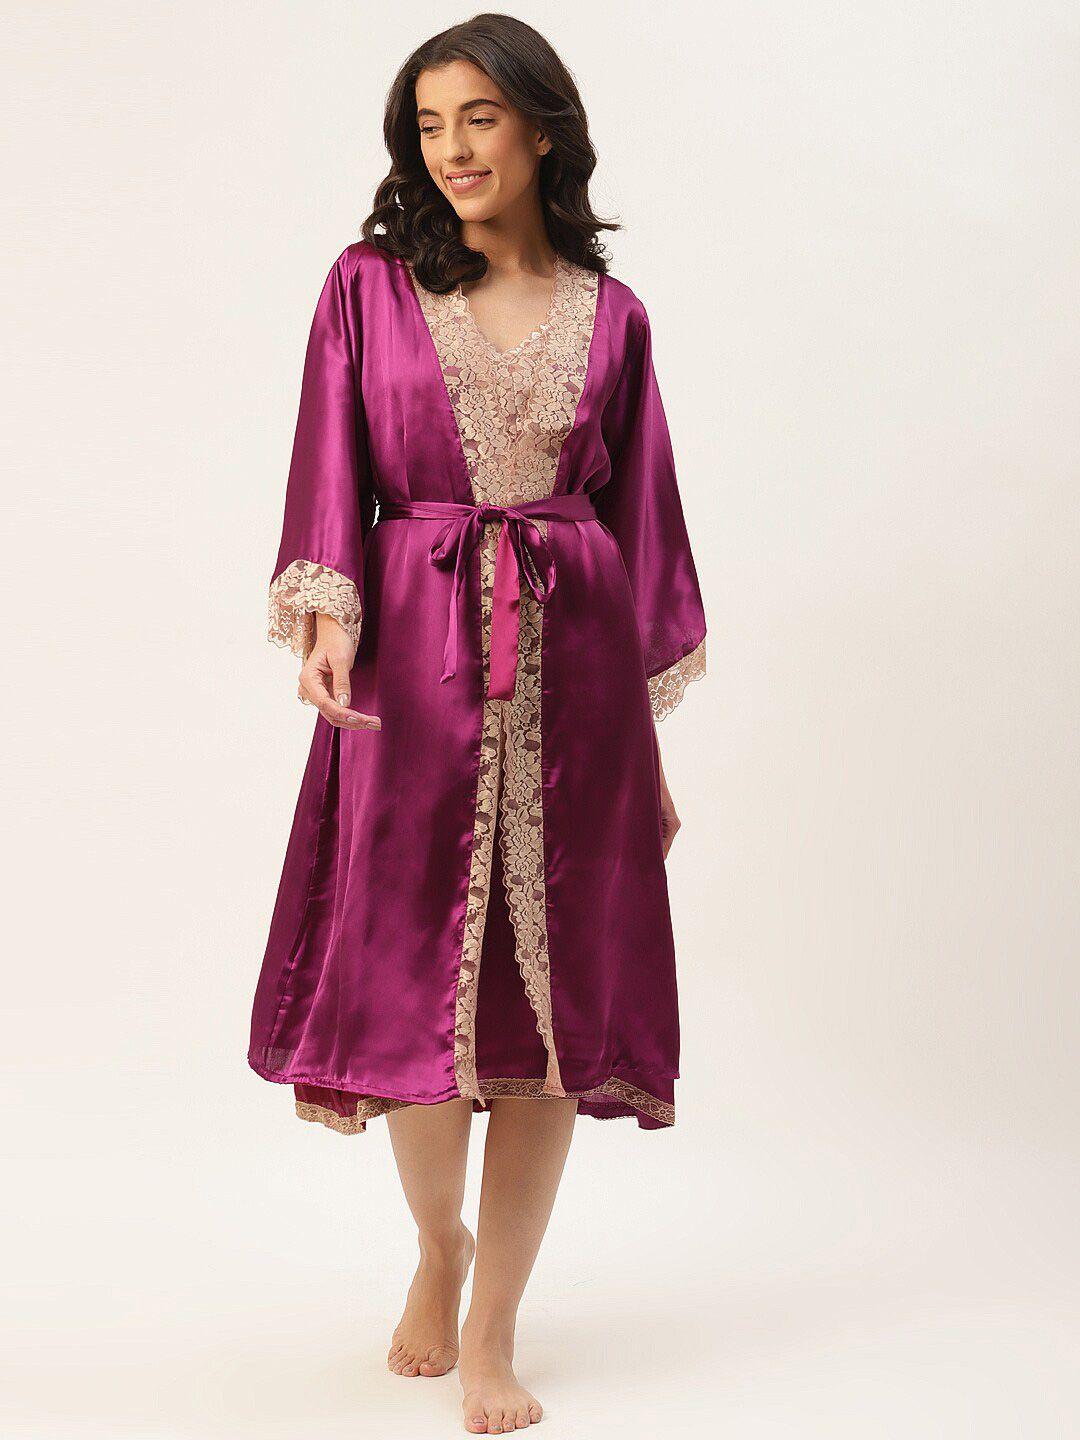 ms.lingies v neck lace up detail satin nightdress with robe